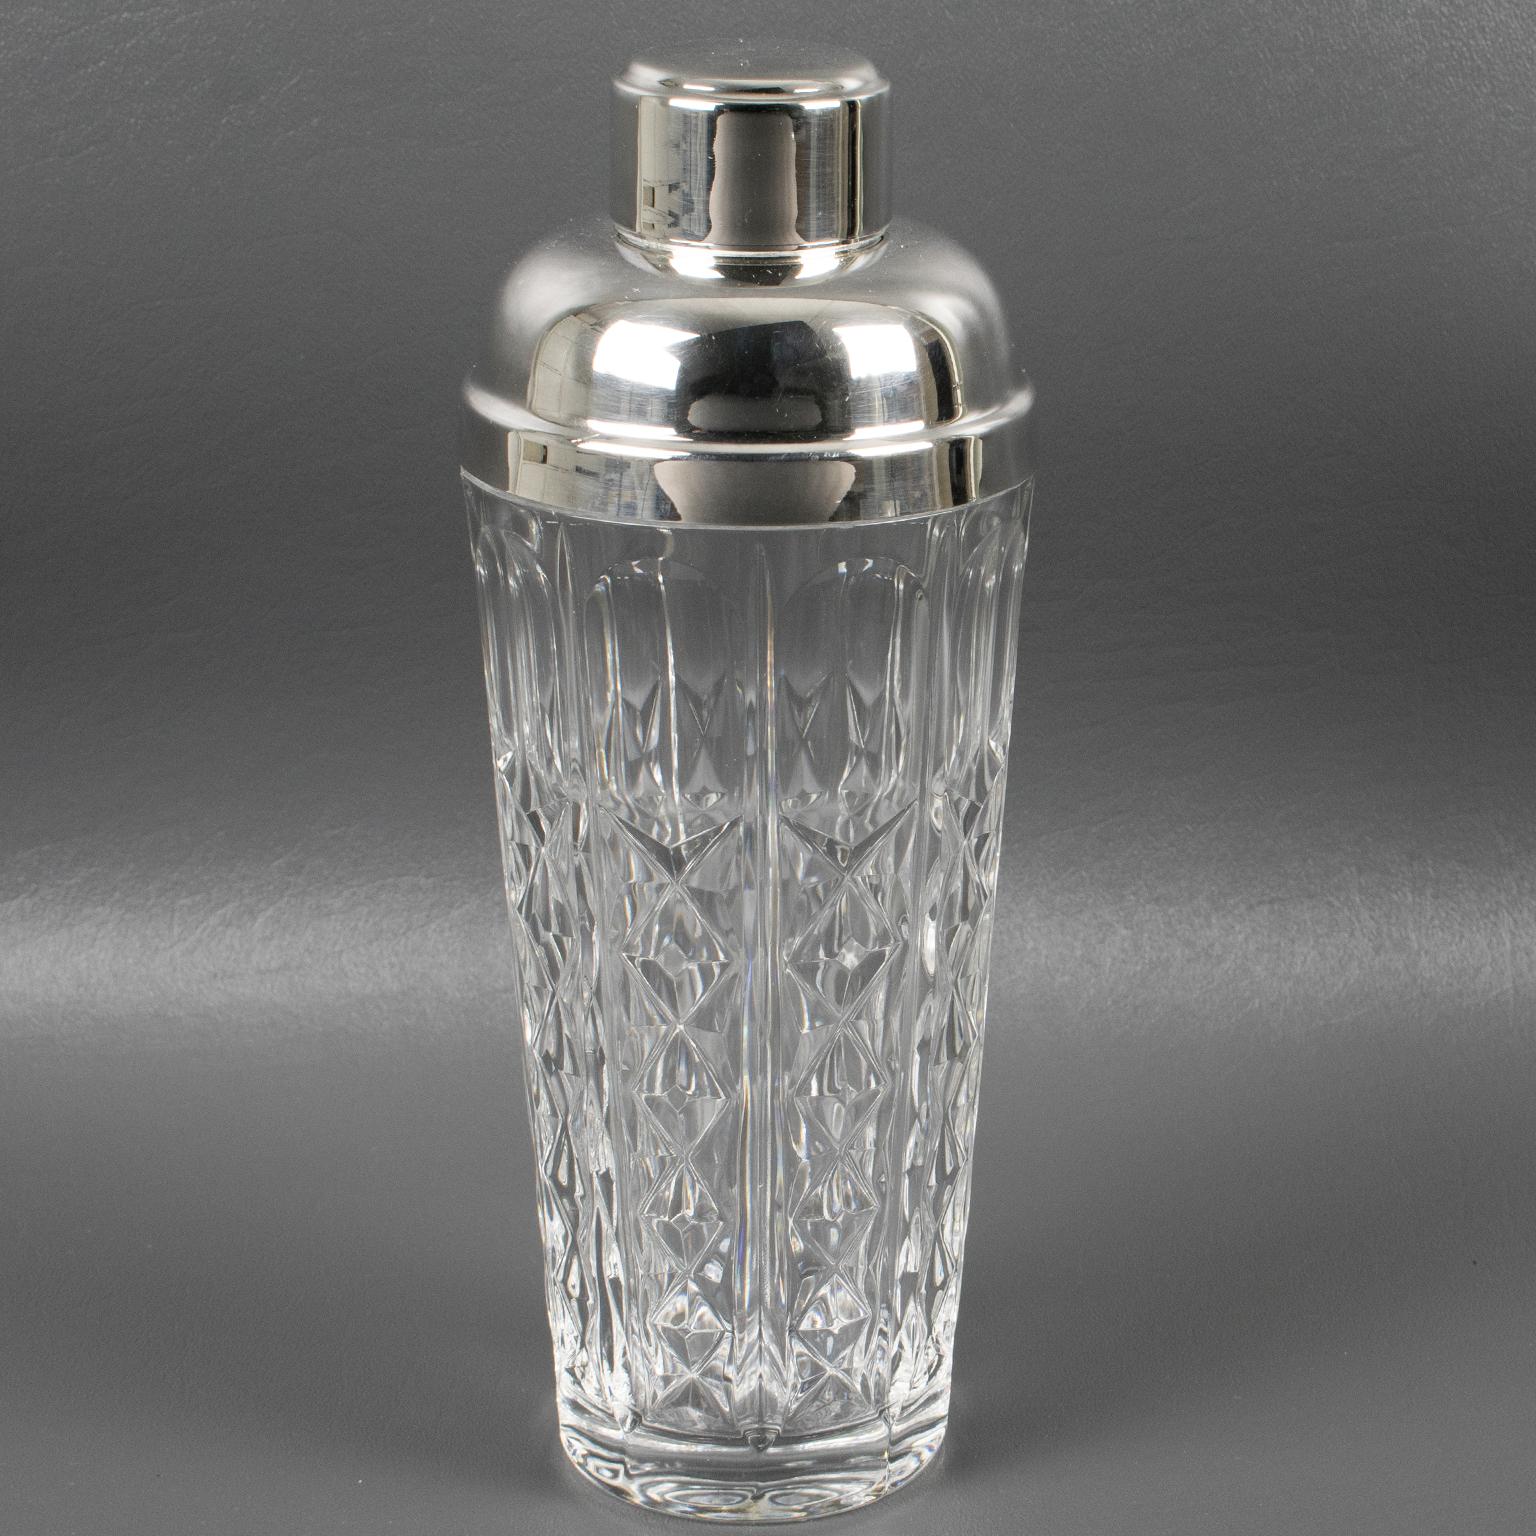 Art Deco Silver Plate and Crystal Cocktail Martini Shaker Barware by Towle, William Adams